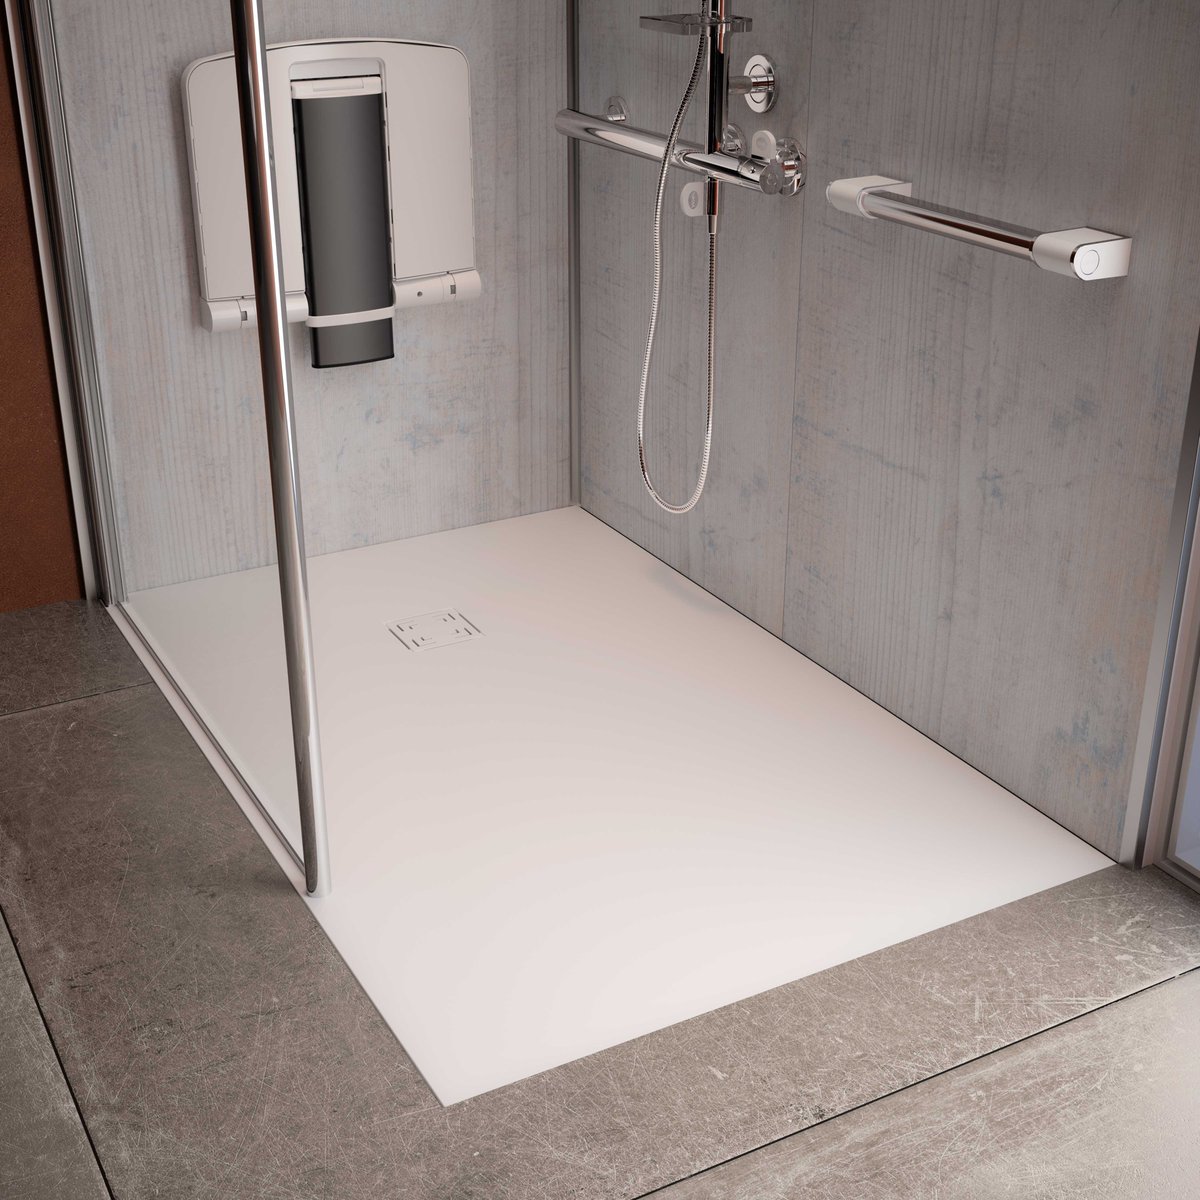 With its contemporary aesthetic and updated waste cover design, the new Onyx Exclusif shower tray provides a stylish yet strong showering solution, with a maximum capacity of 31.5 st (200kg) to accommodate wheelchair users and carers 💪 Find out more - loom.ly/Mjdzhkk